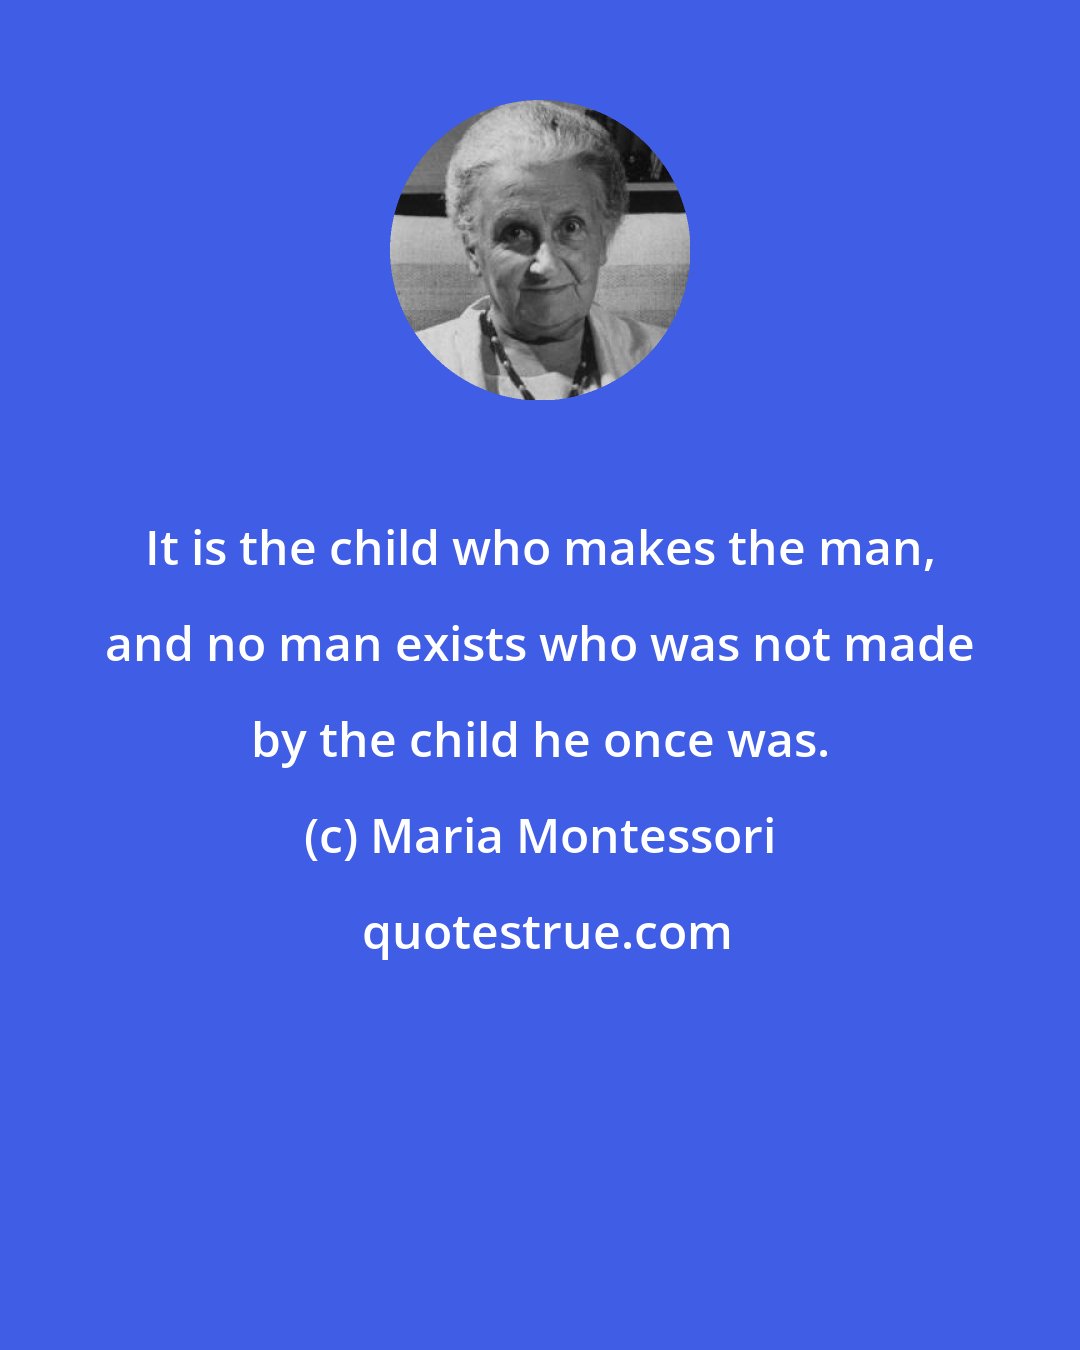 Maria Montessori: It is the child who makes the man, and no man exists who was not made by the child he once was.